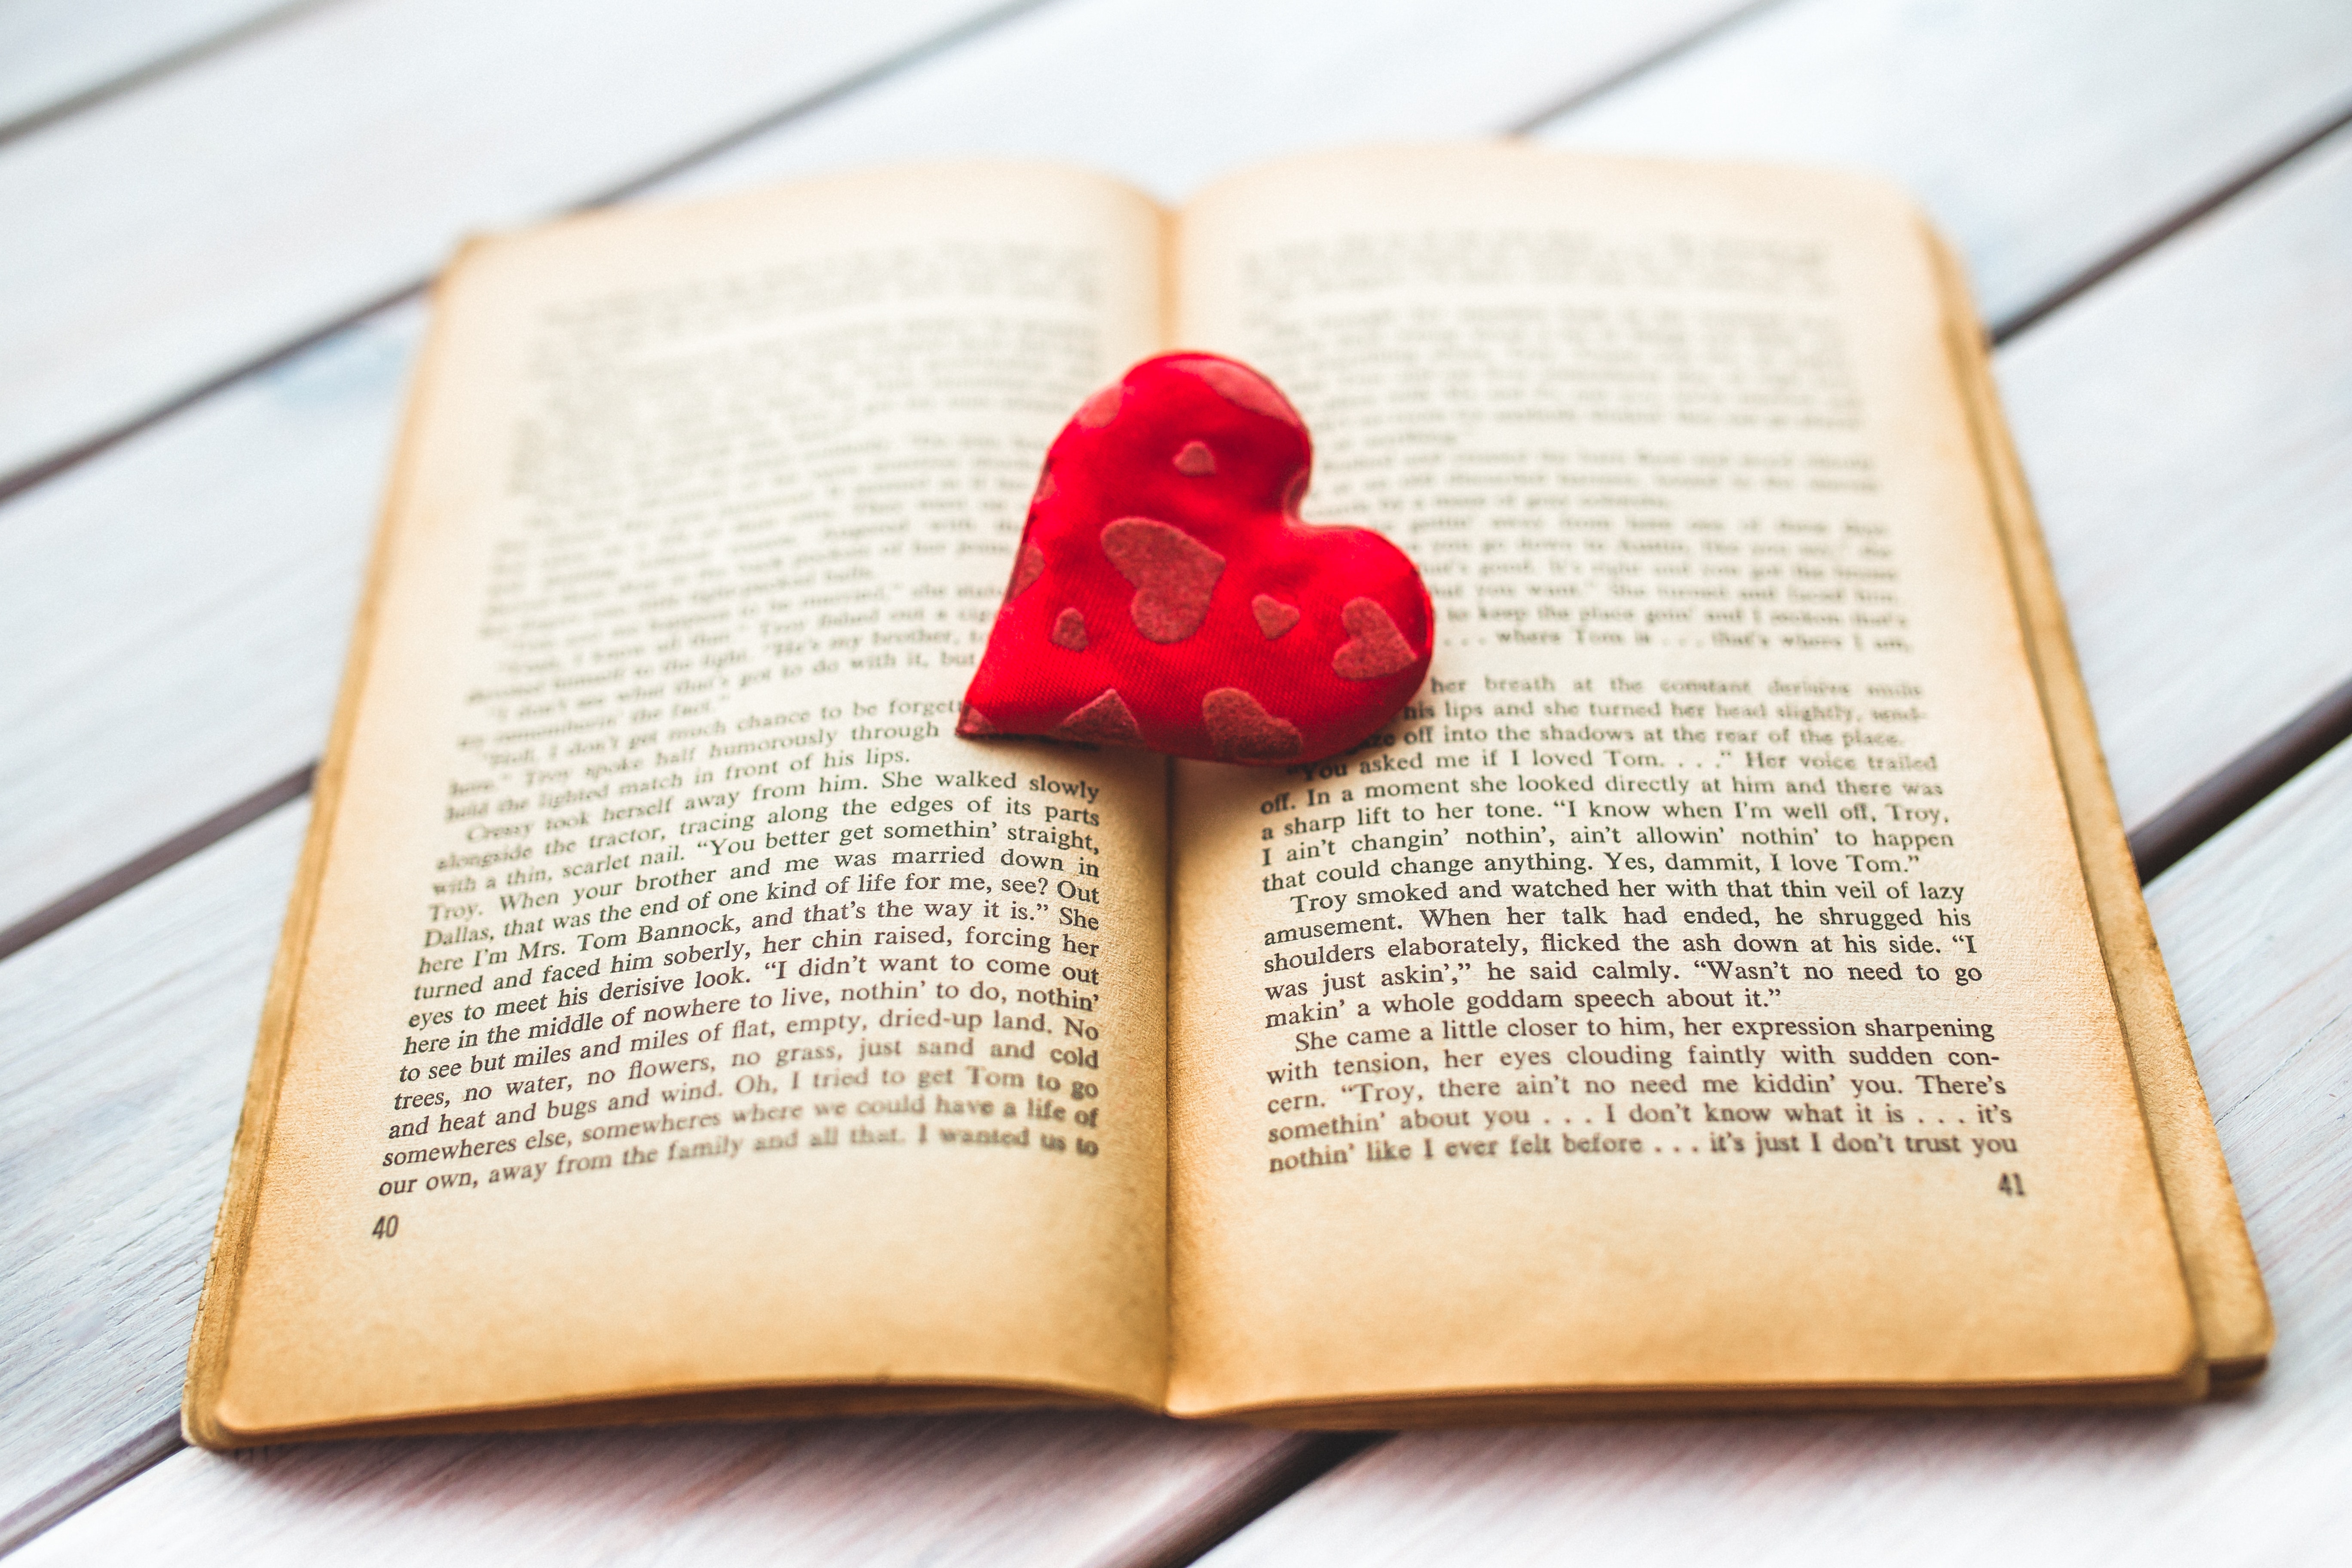 Red heart on a old opened book ii photo